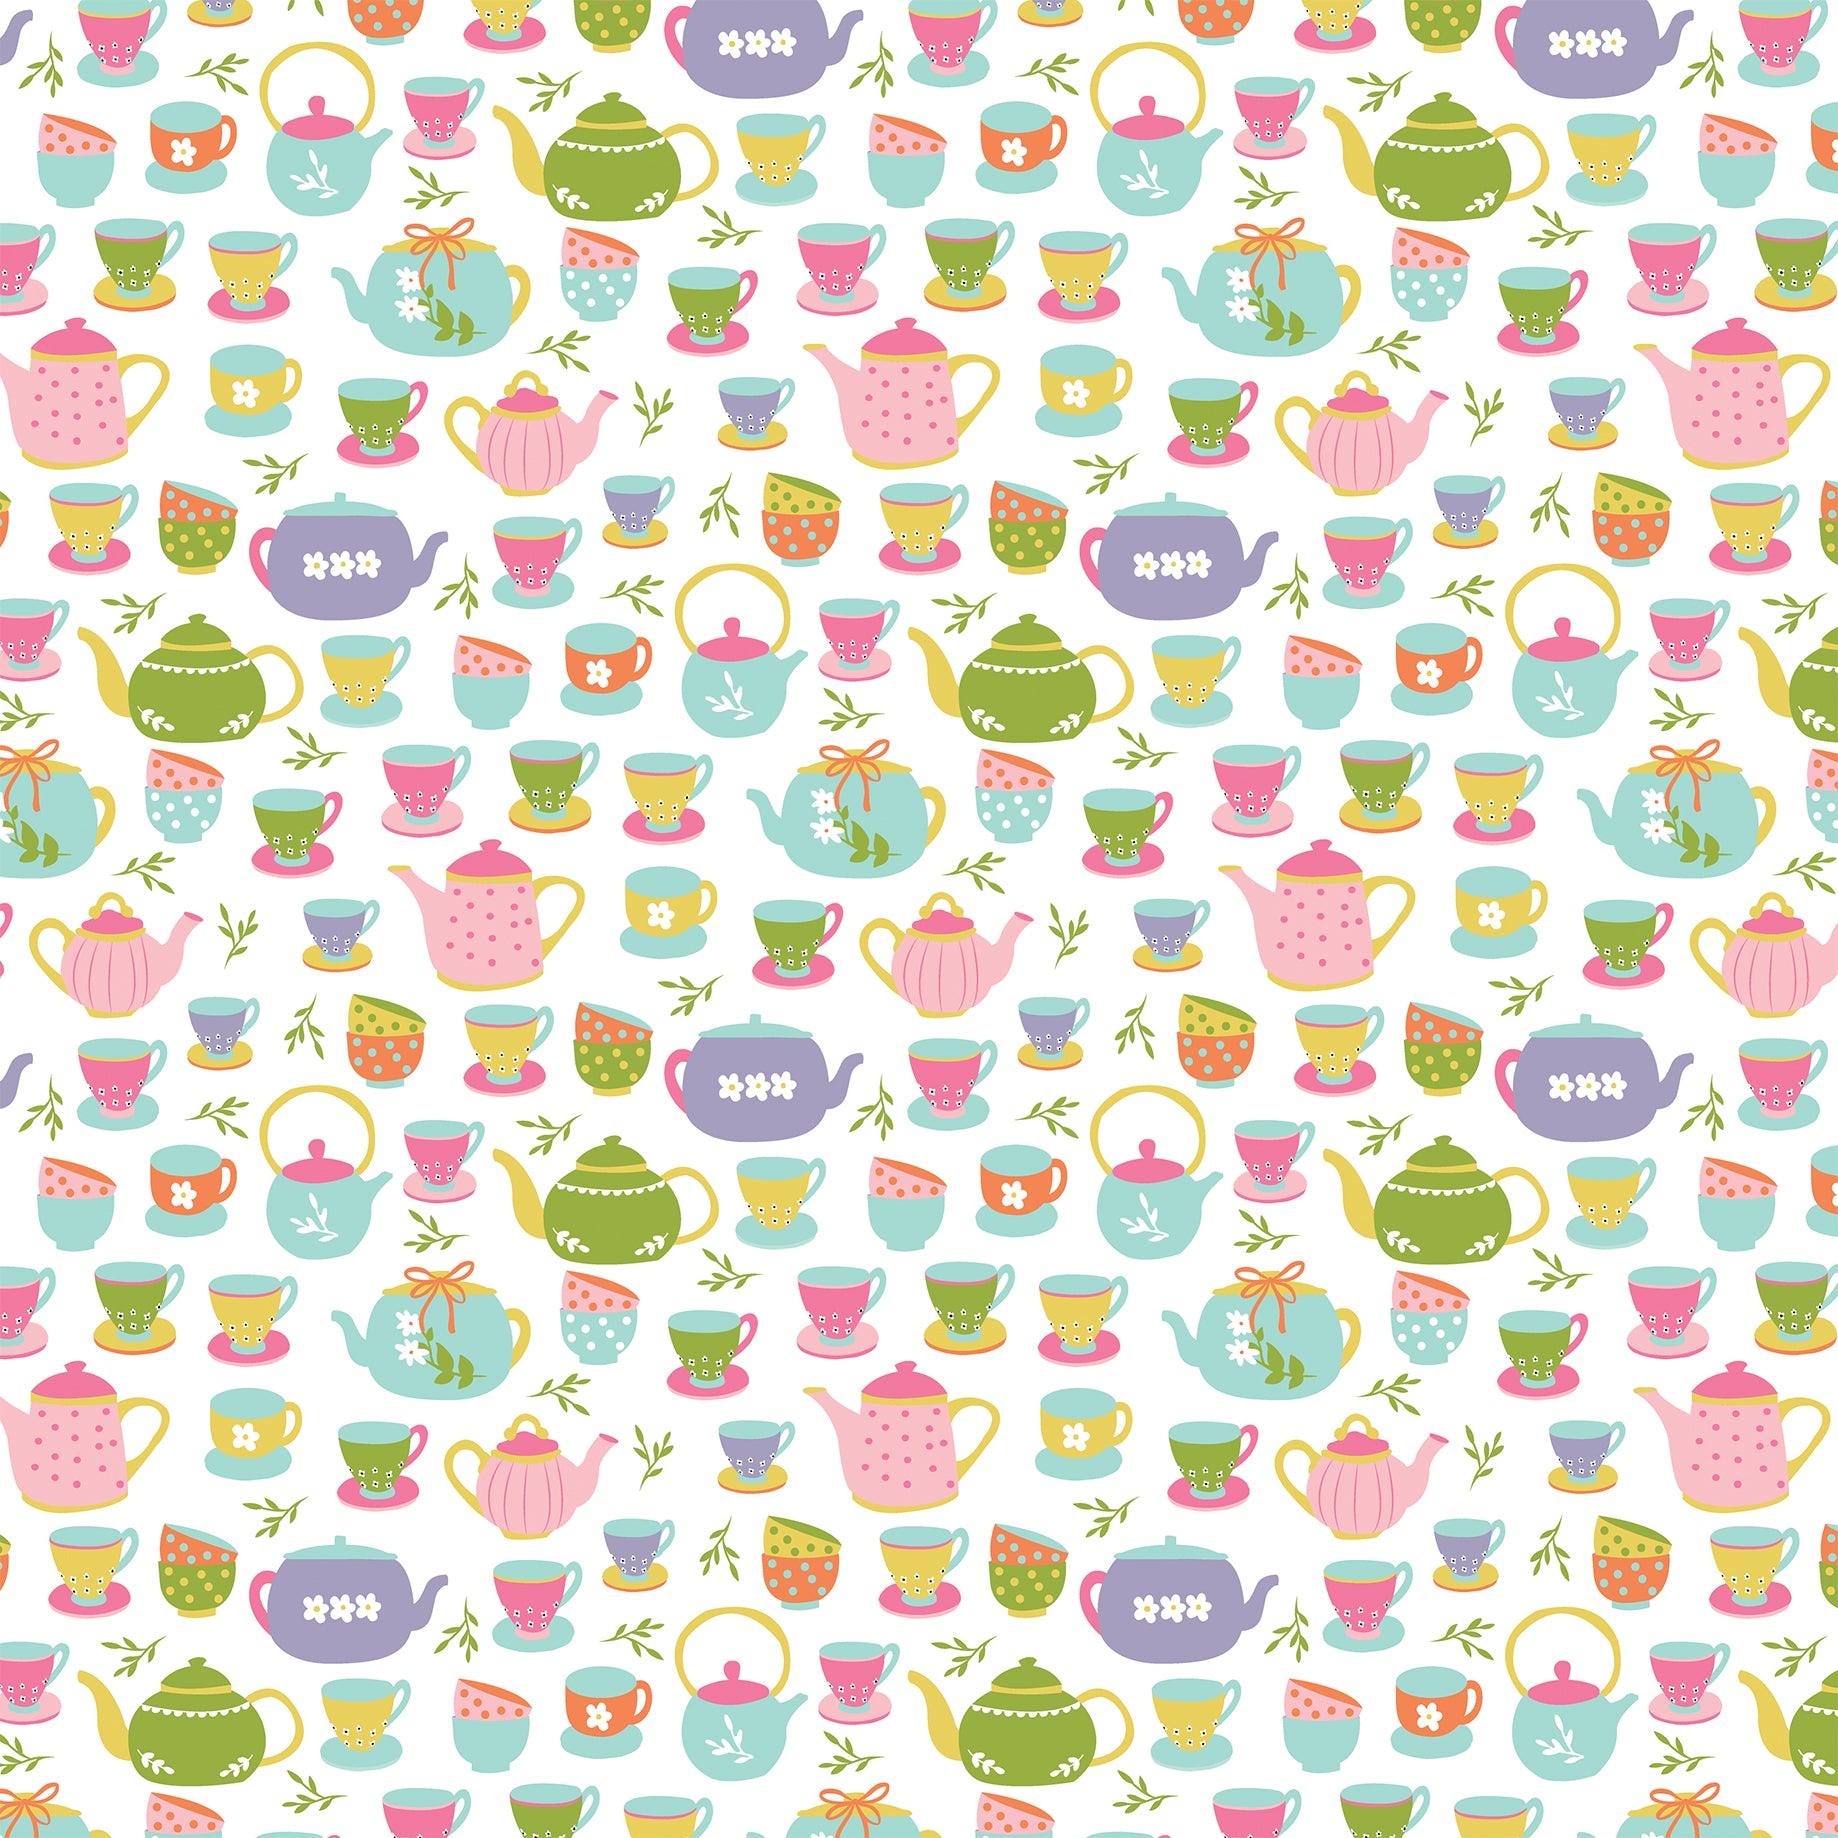 All About A Girl Collection Tea Time 12 x 12 Double-Sided Scrapbook Paper by Echo Park Paper - Scrapbook Supply Companies